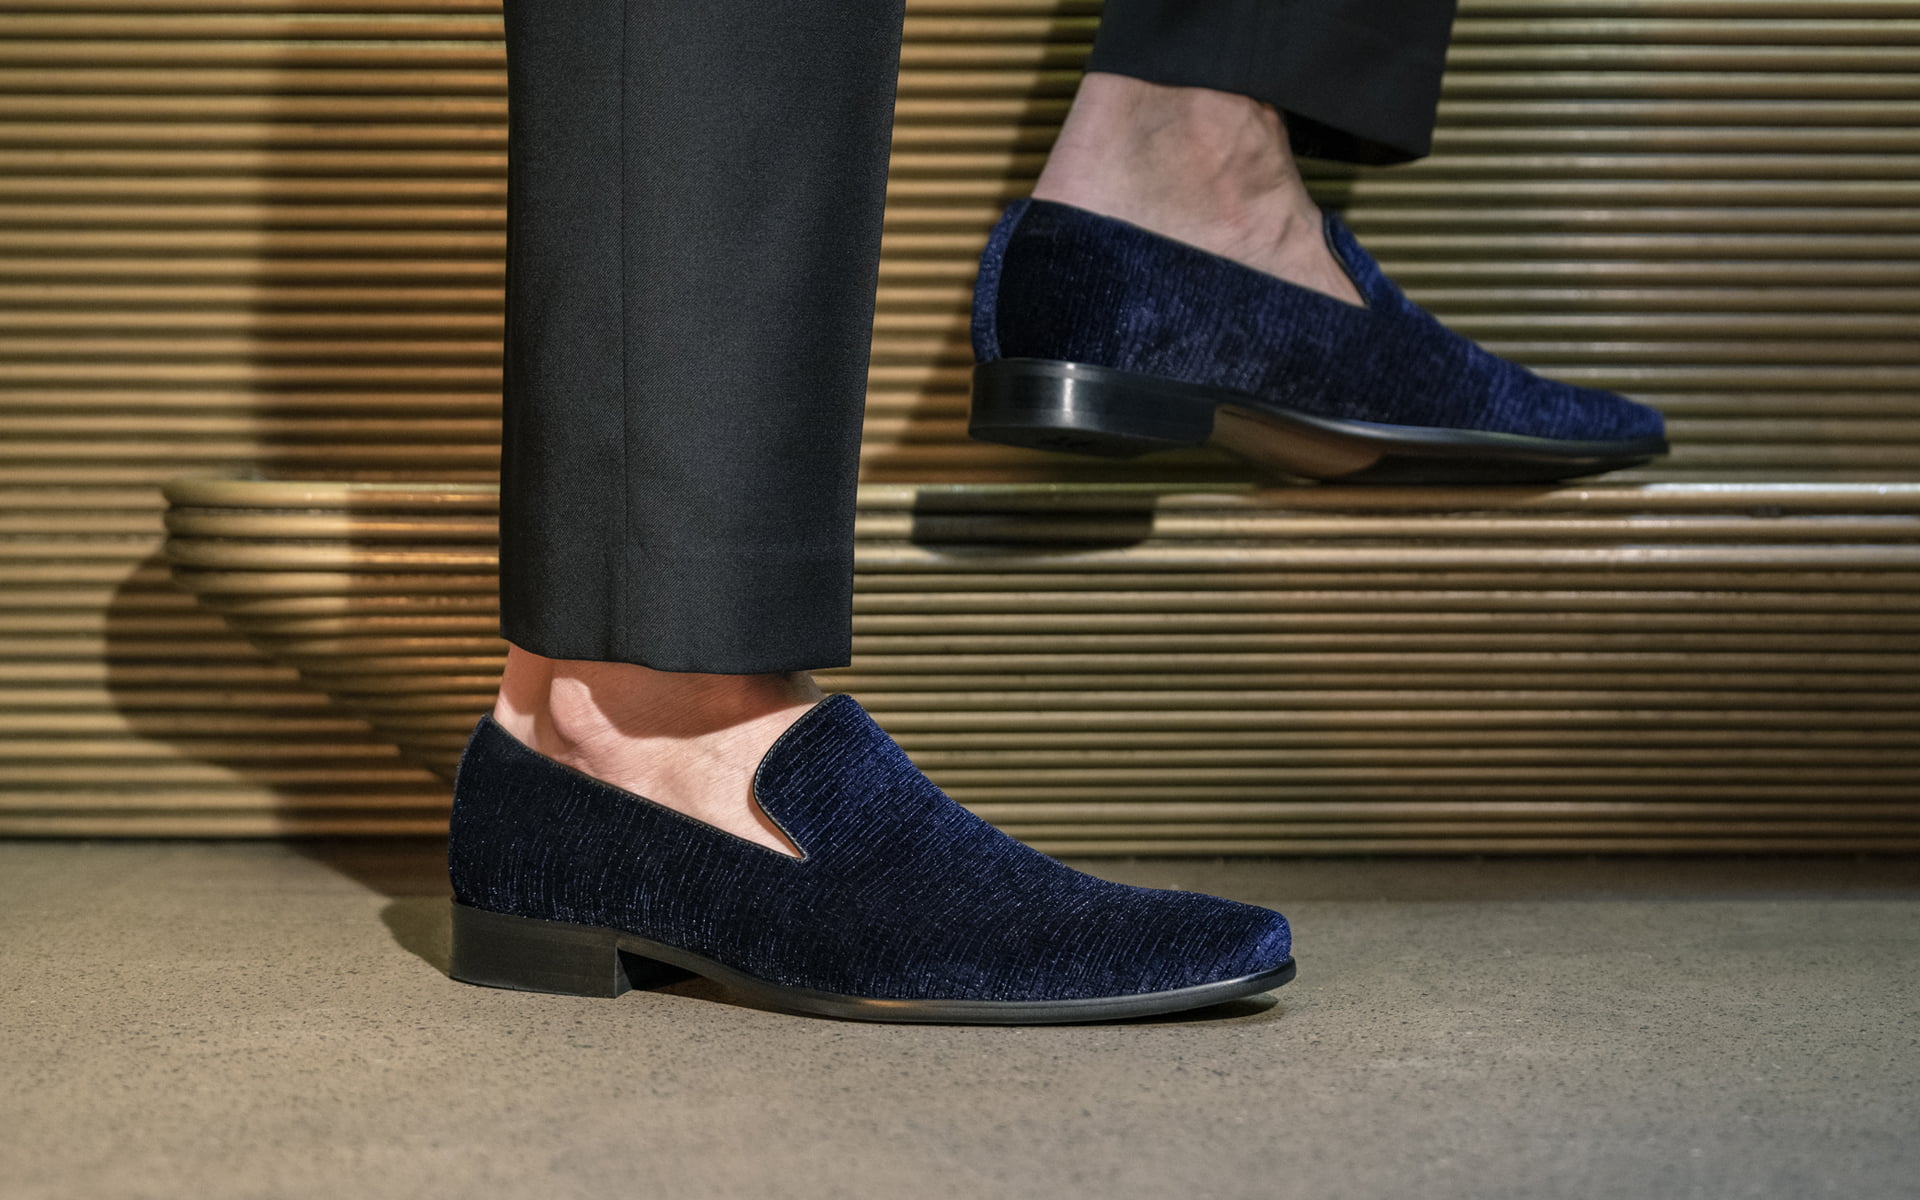 Click to shop the Florsheim Postino velvet slip on. Image features the shoe in navy.